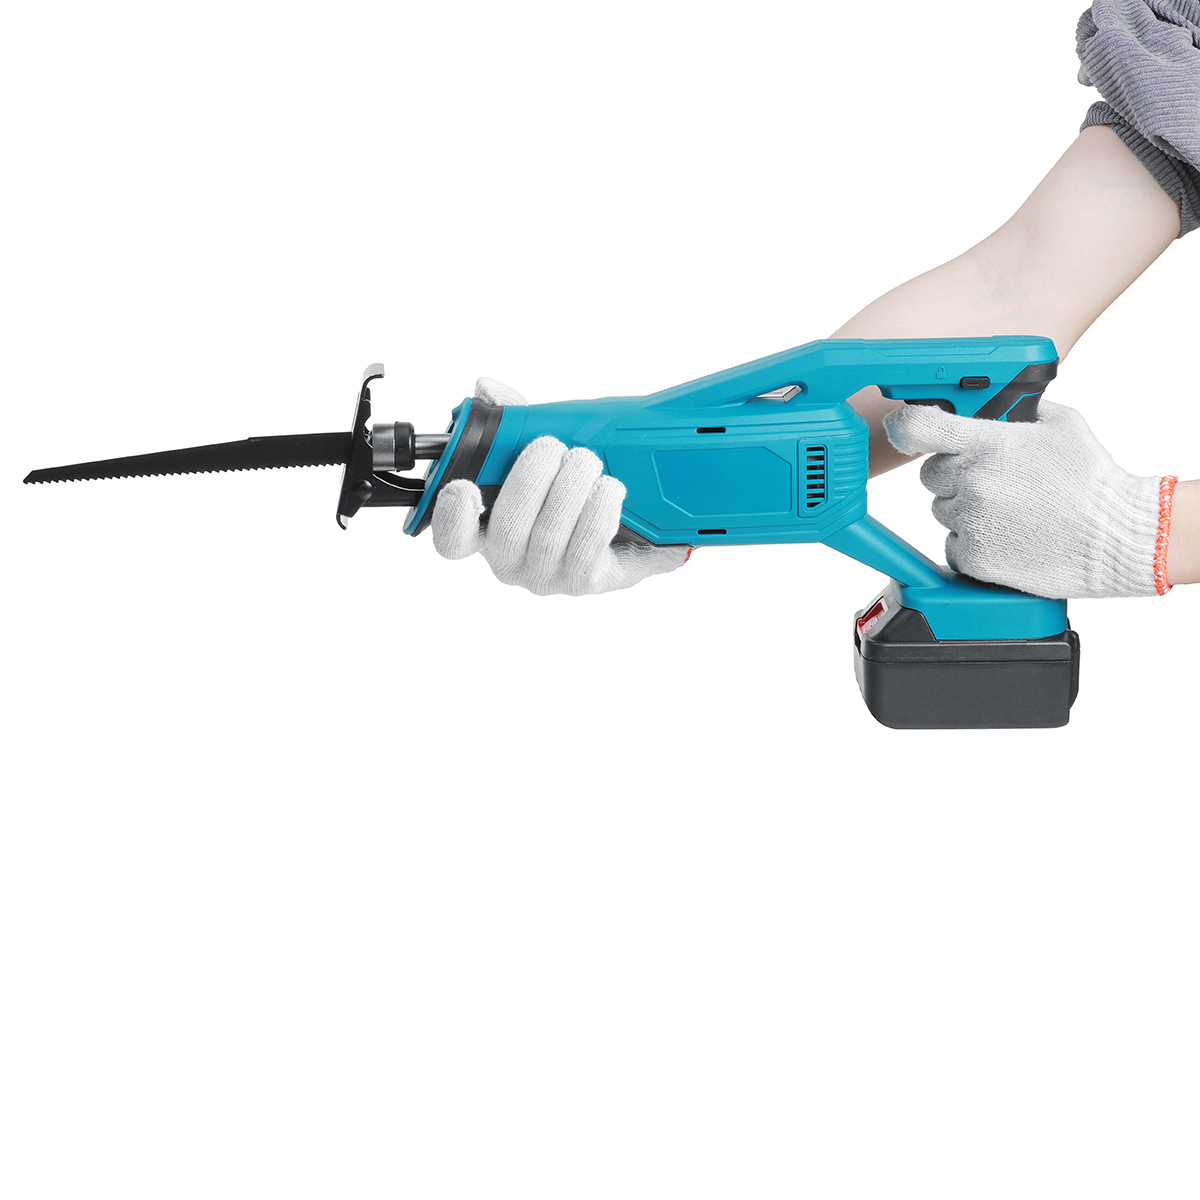 21V-5000Rpm-Reciprocating-Saw-Professional-Electric-Branch-Cutter-Recipro-Saw-W-1pc-Battery-1818077-5